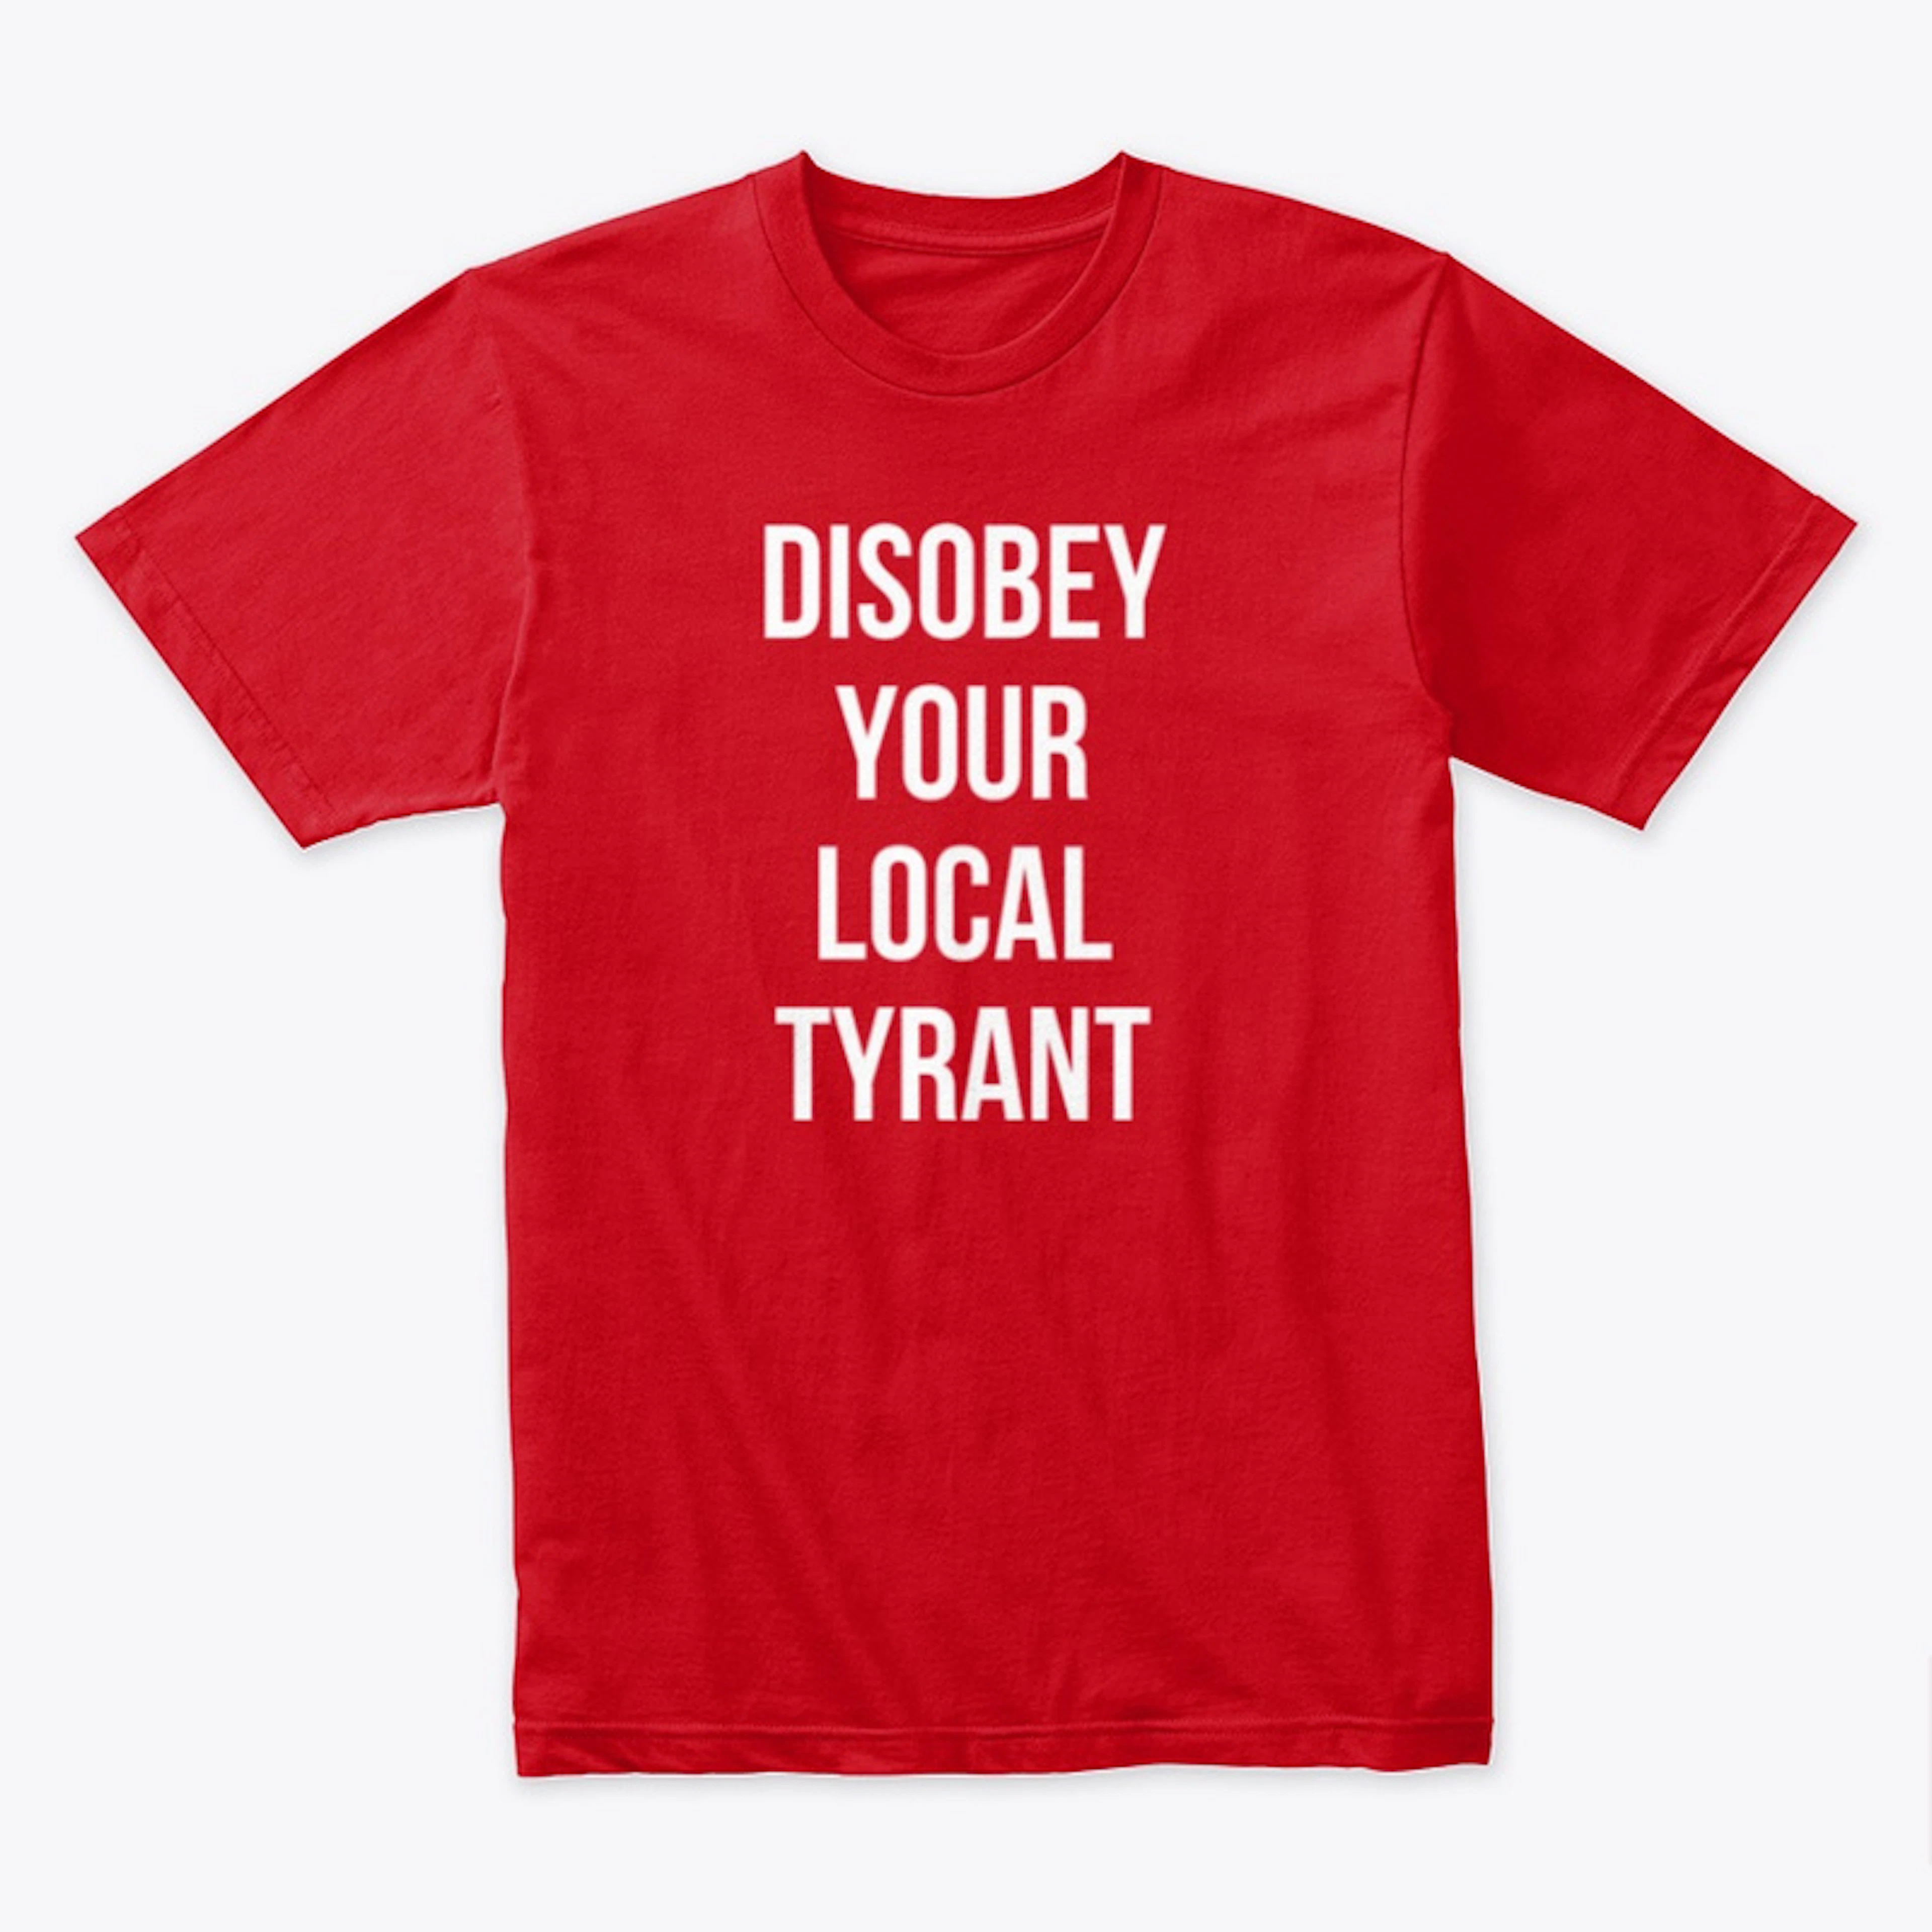 Disobey your local tyrant